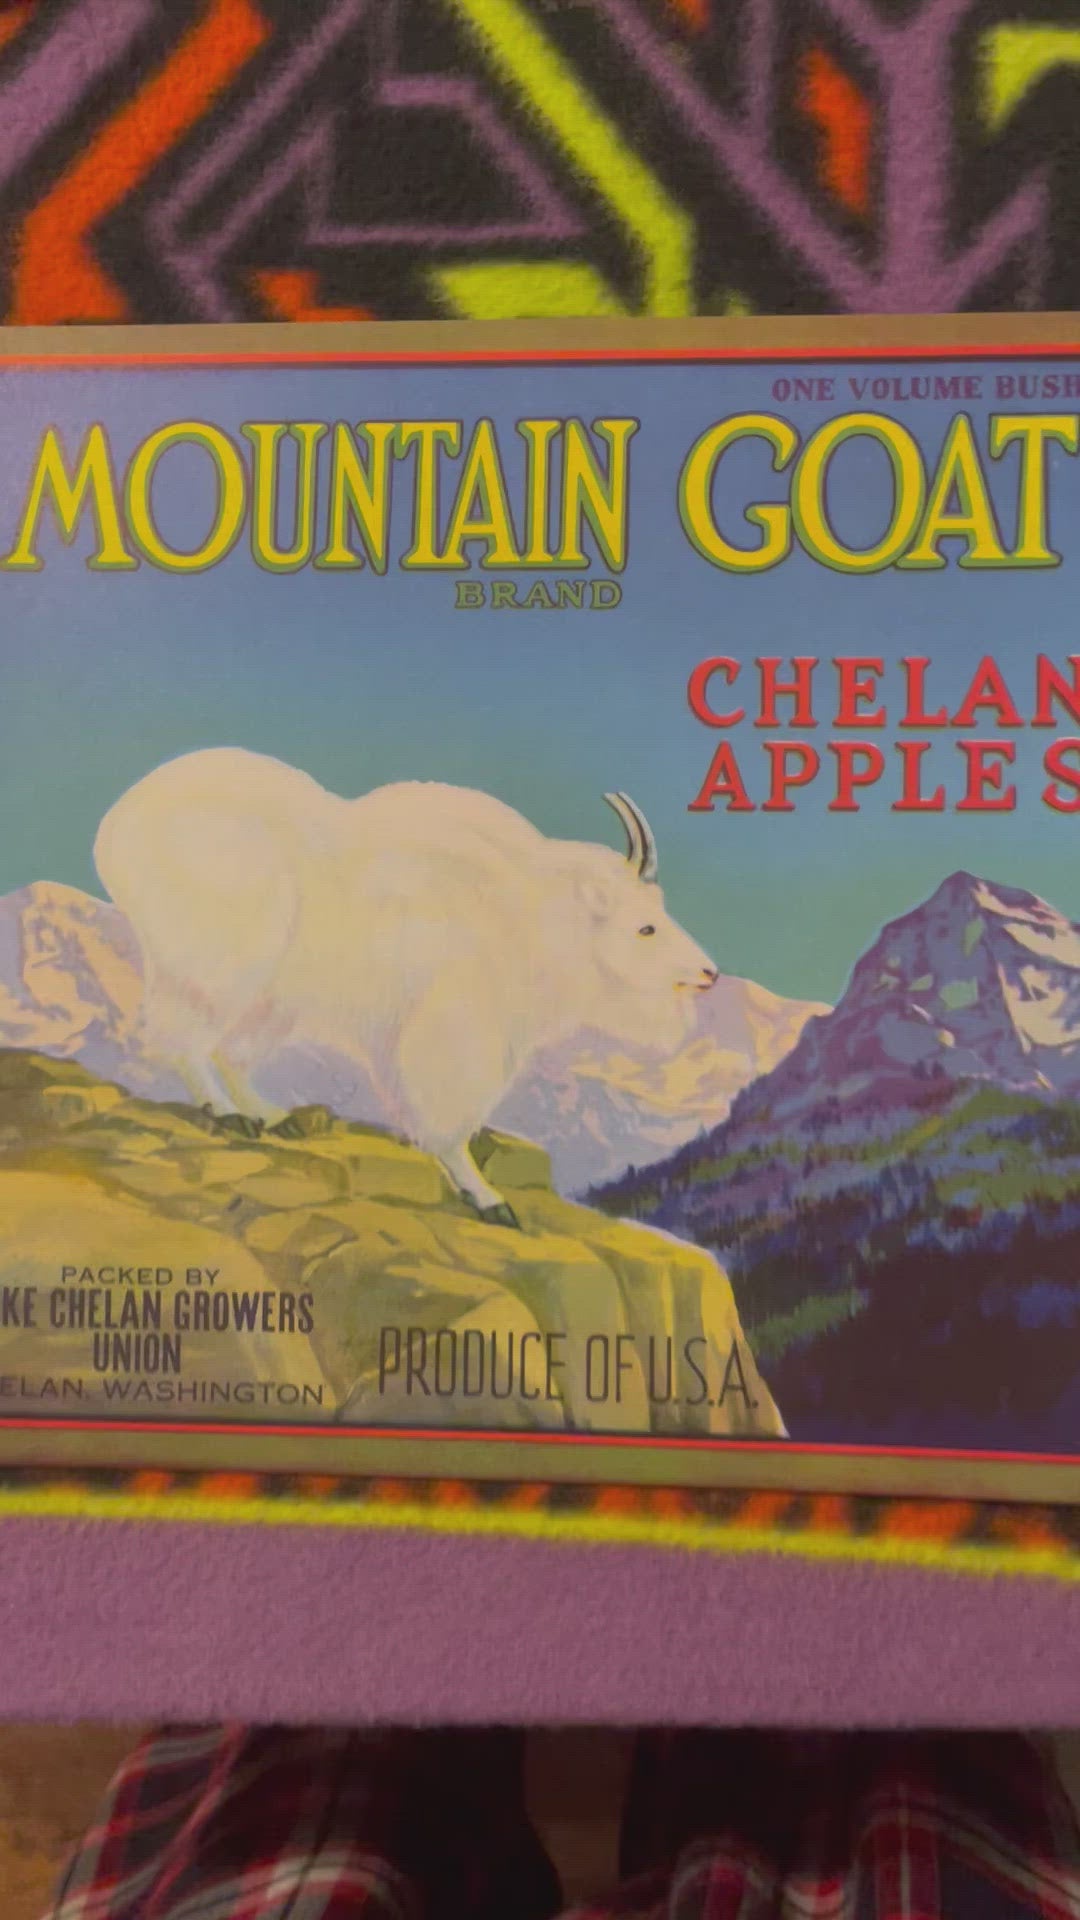 Vintage Mountain Goat Crate Label, Chelan, WA, 1930s Vintage Advertisements Antique Vintage Food and Misc. Labels Vintage and Antique Gifts